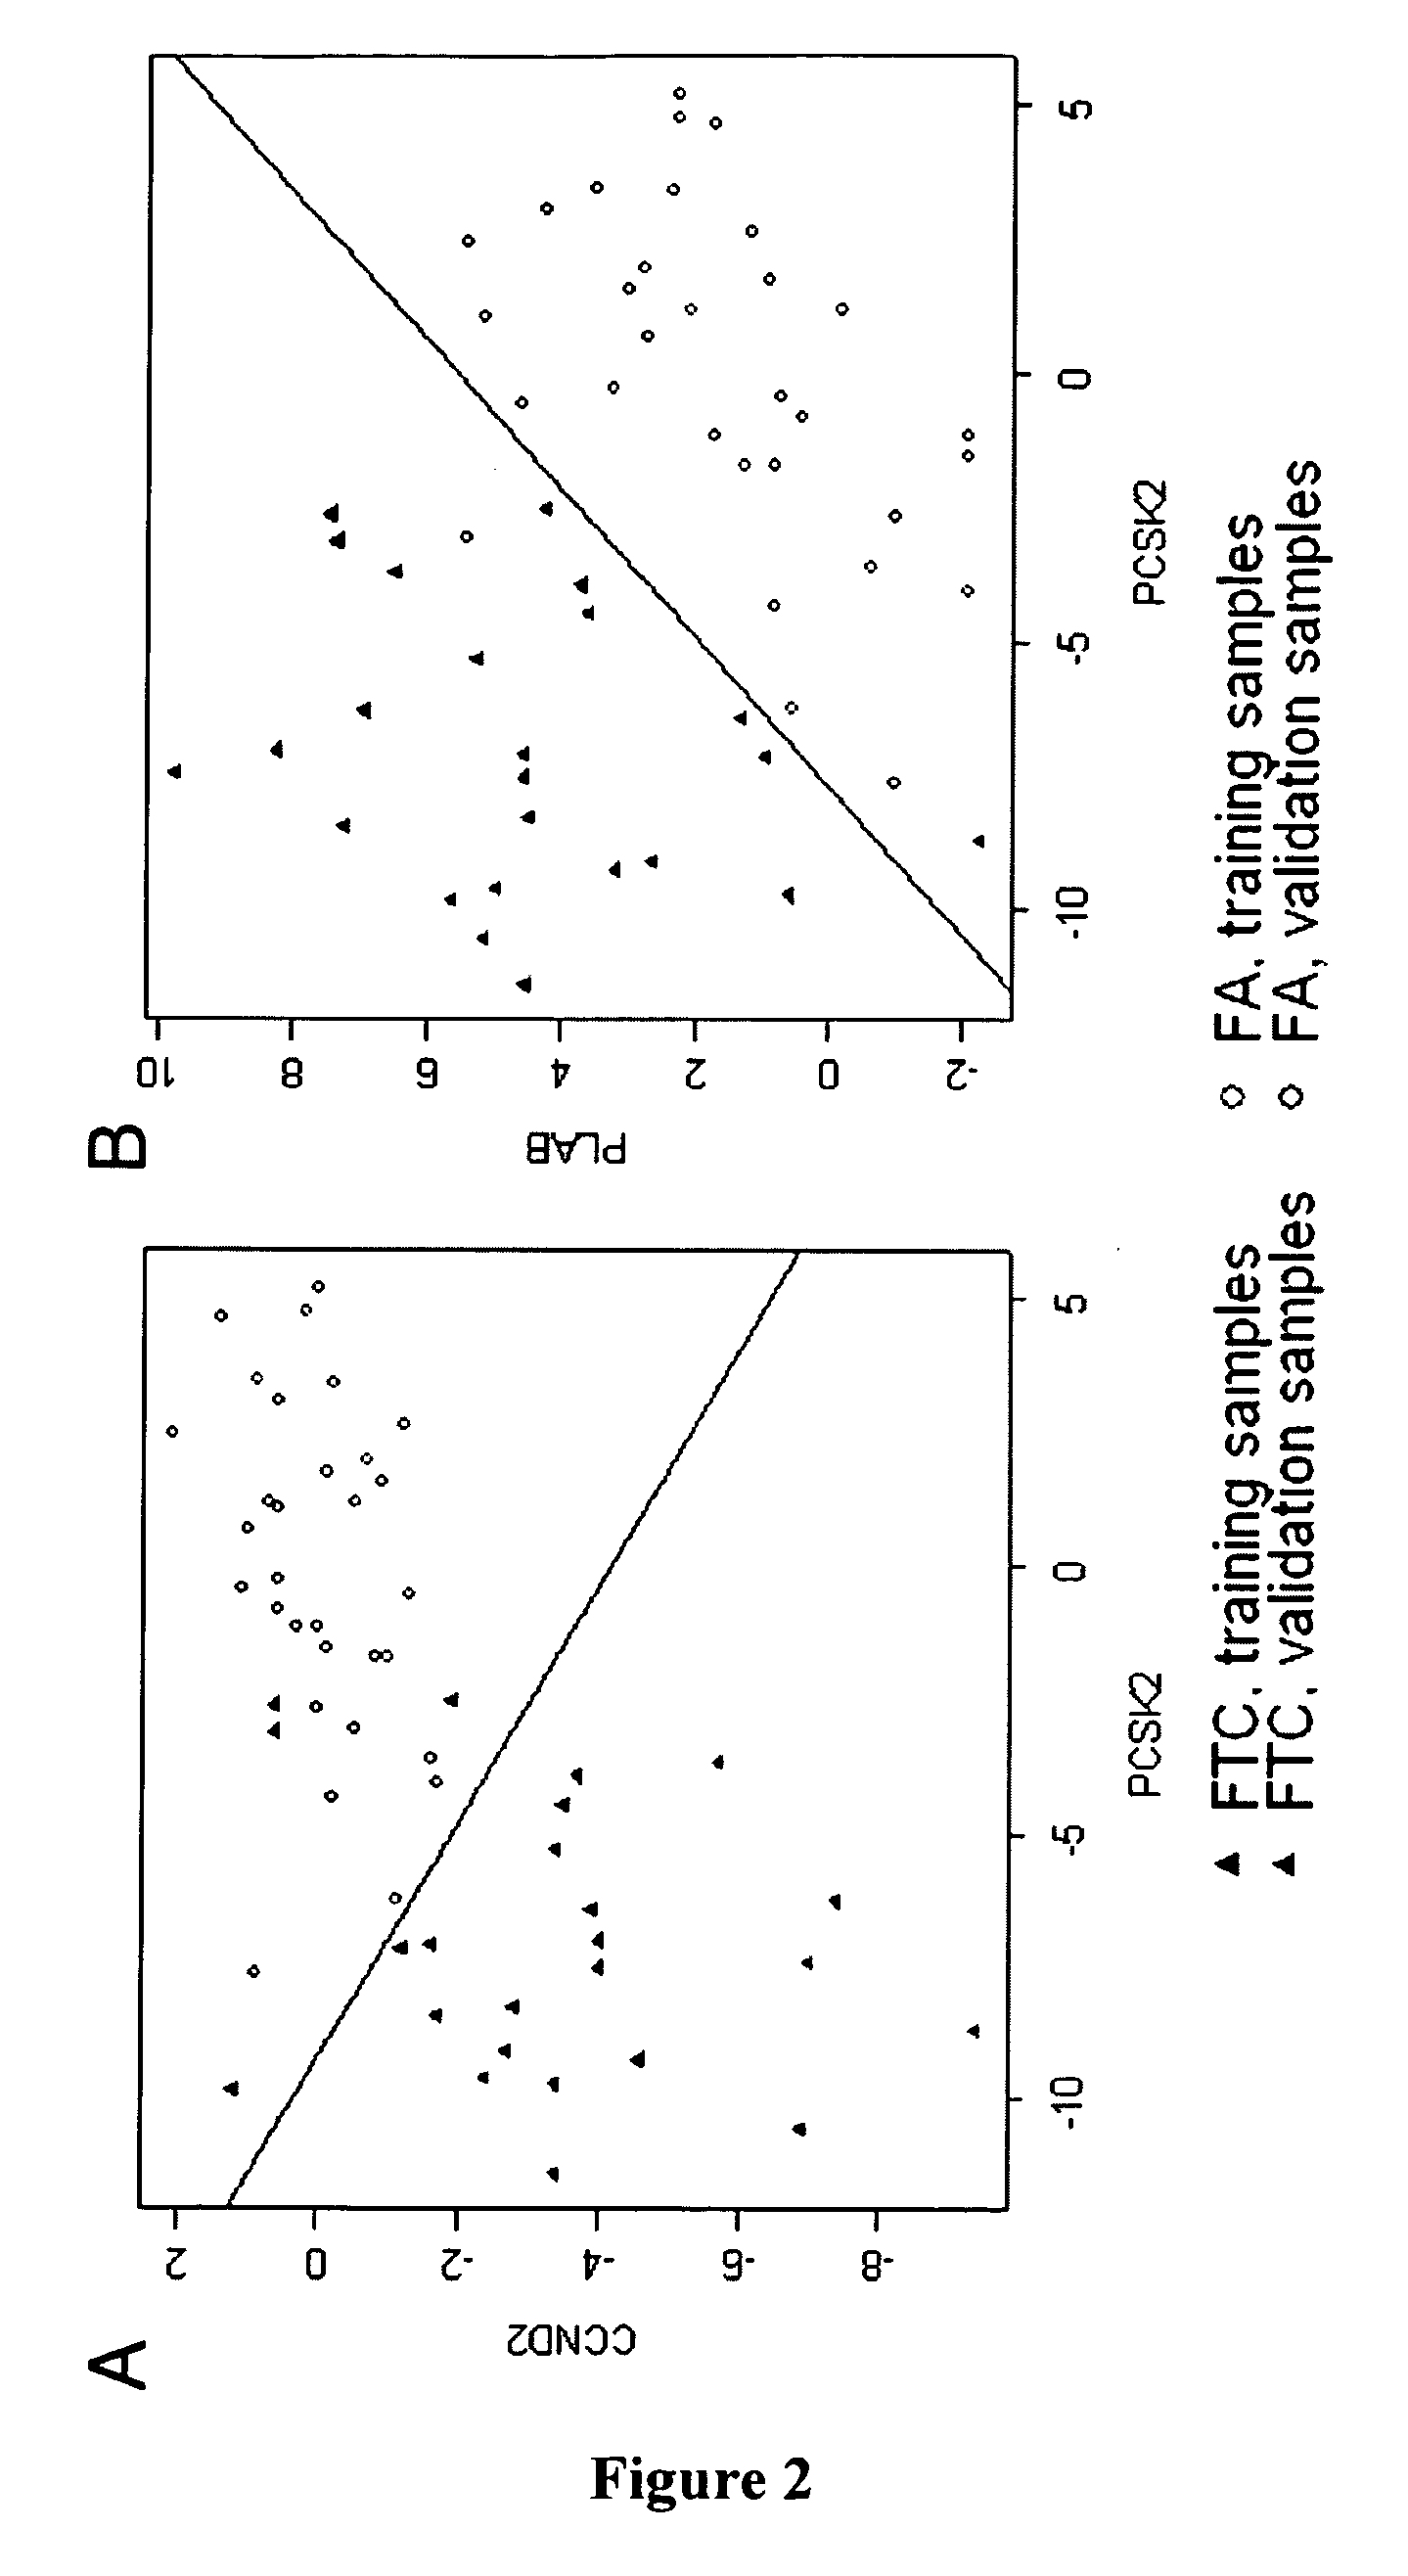 Methods for differentiating malignant from benign thyroid tissue